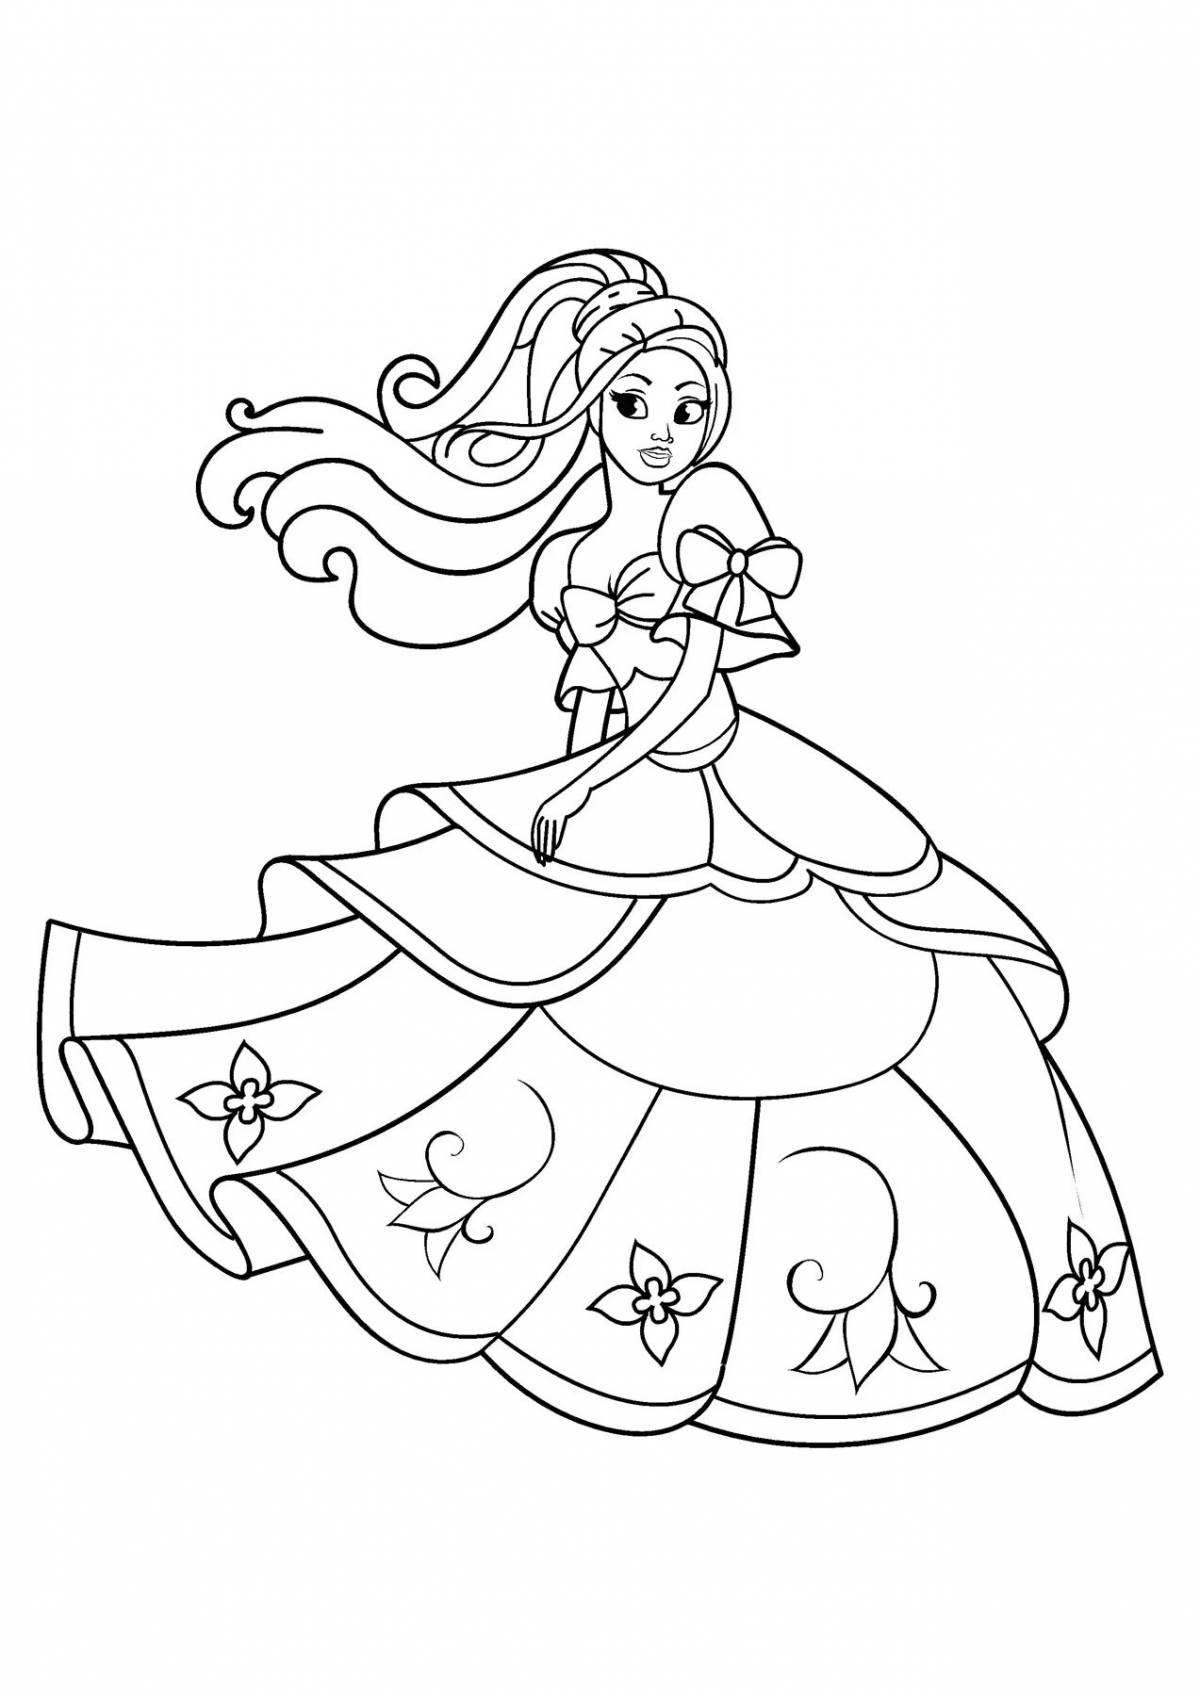 Magic coloring for girls 3 years old princess